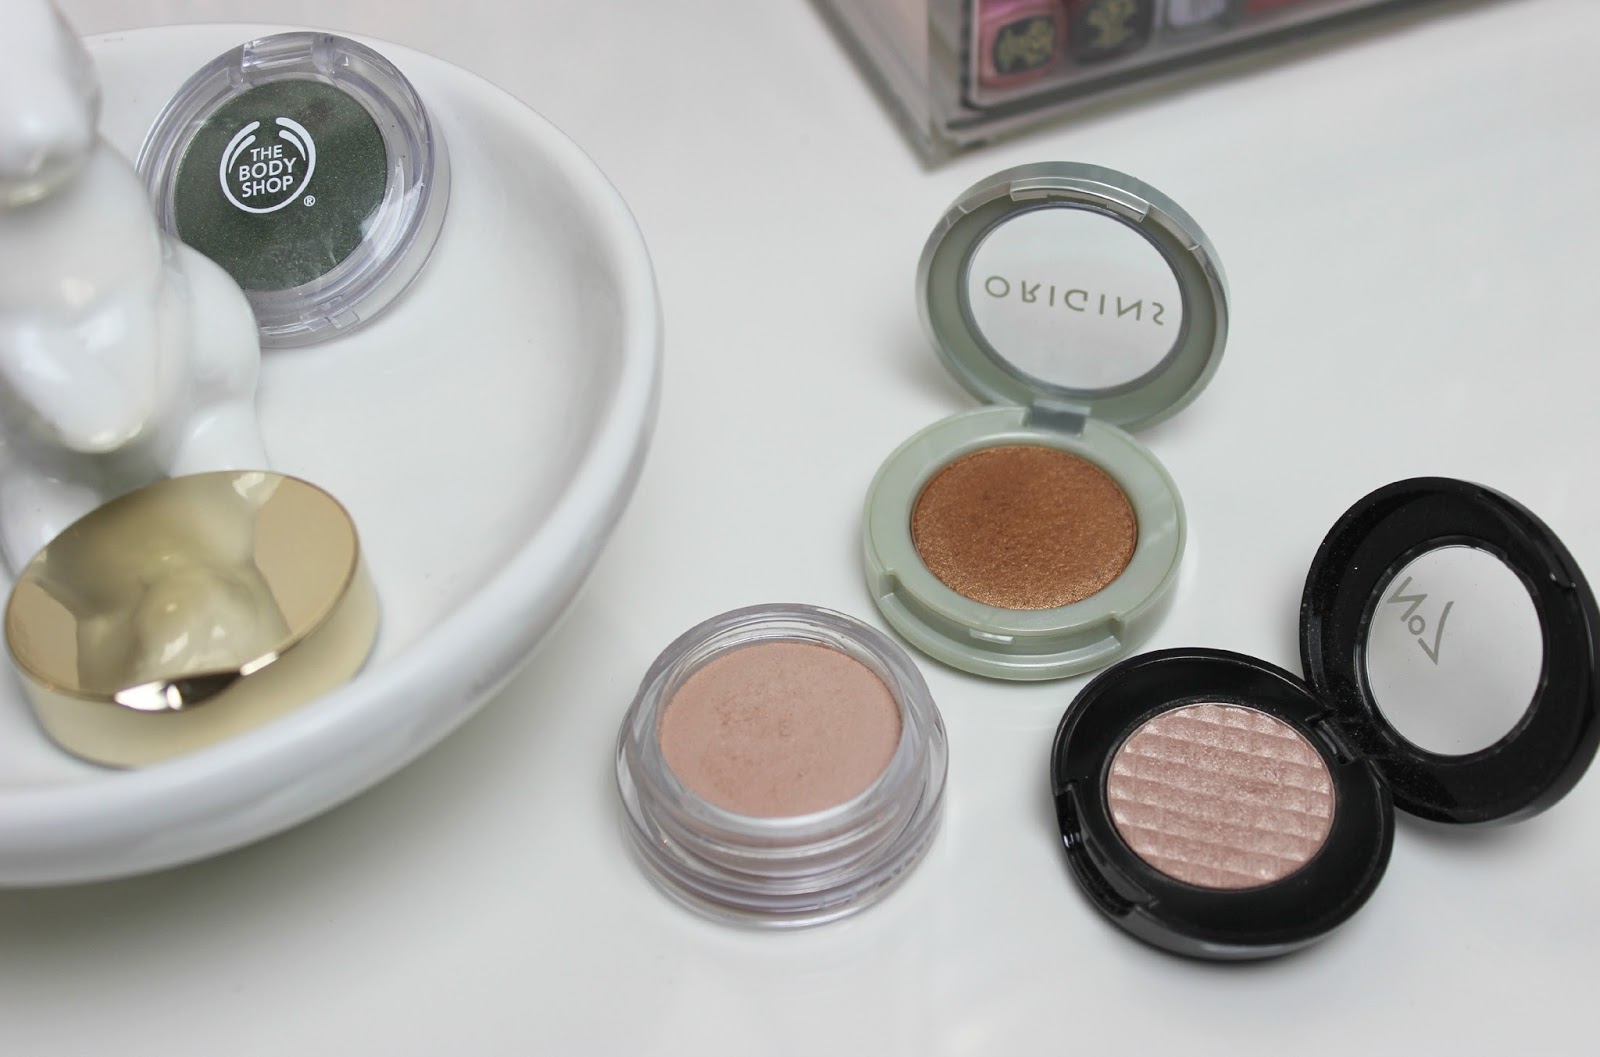 A picture of Origins Peeper Pleasers Powder Eye Shadow, No7 Stay Perfect Eyeshadow and Clarins Ombre Matte Cream-to-Powder Matte Eyeshadows